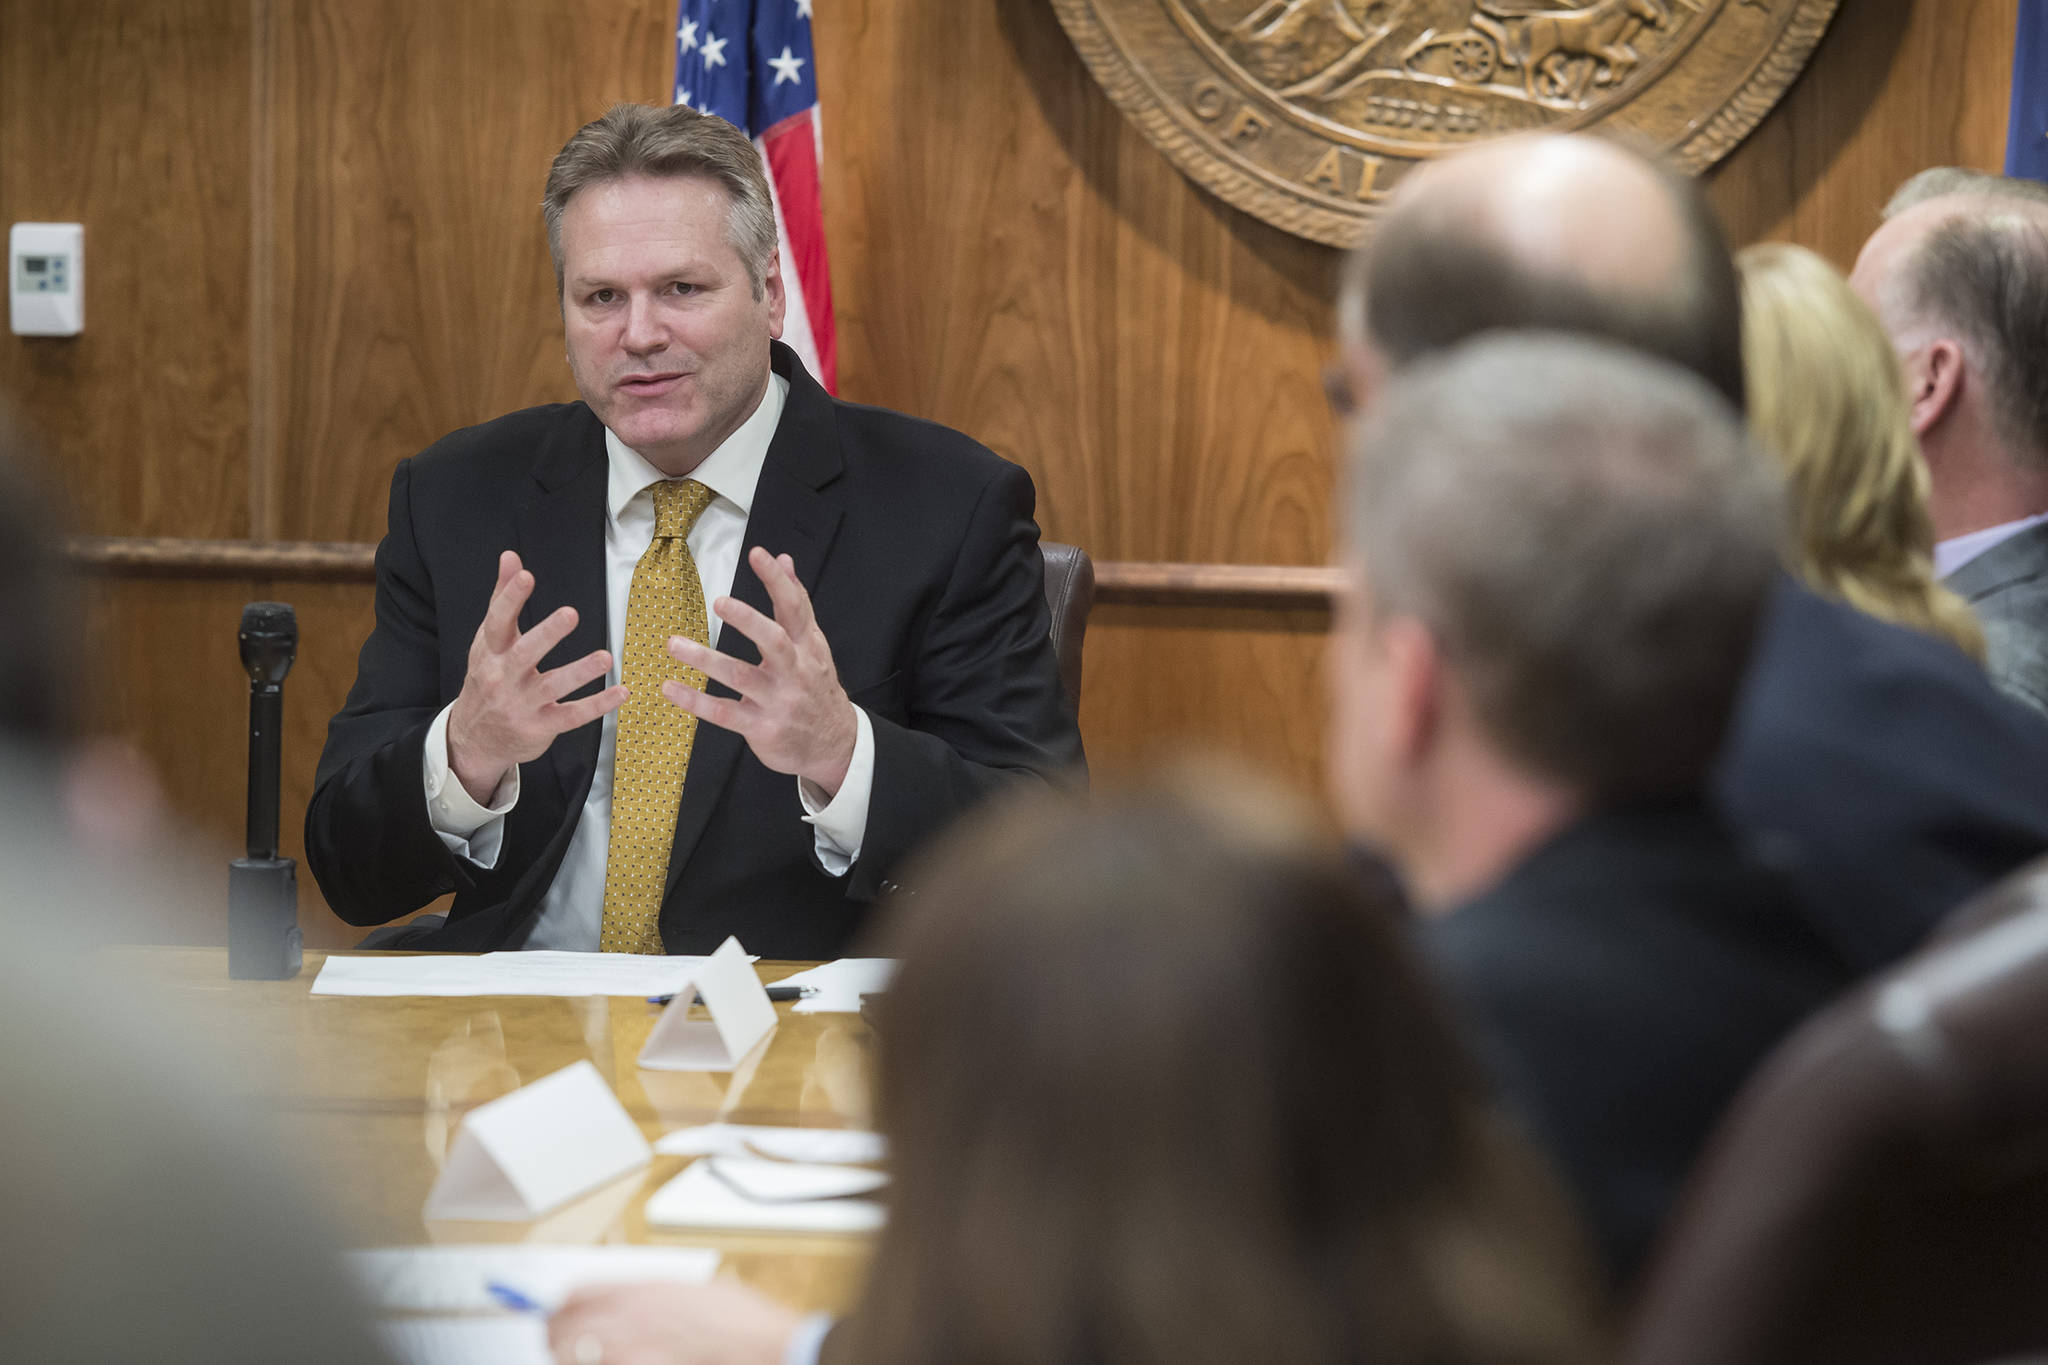 Gov. Mike Dunleavy meets with his cabinet members and gives attending media a list of his administration’s priorities at the Capitol on Tuesday, Jan. 8, 2019. The 31st Legislative Session opens next Tuesday. (Michael Penn | Juneau Empire)